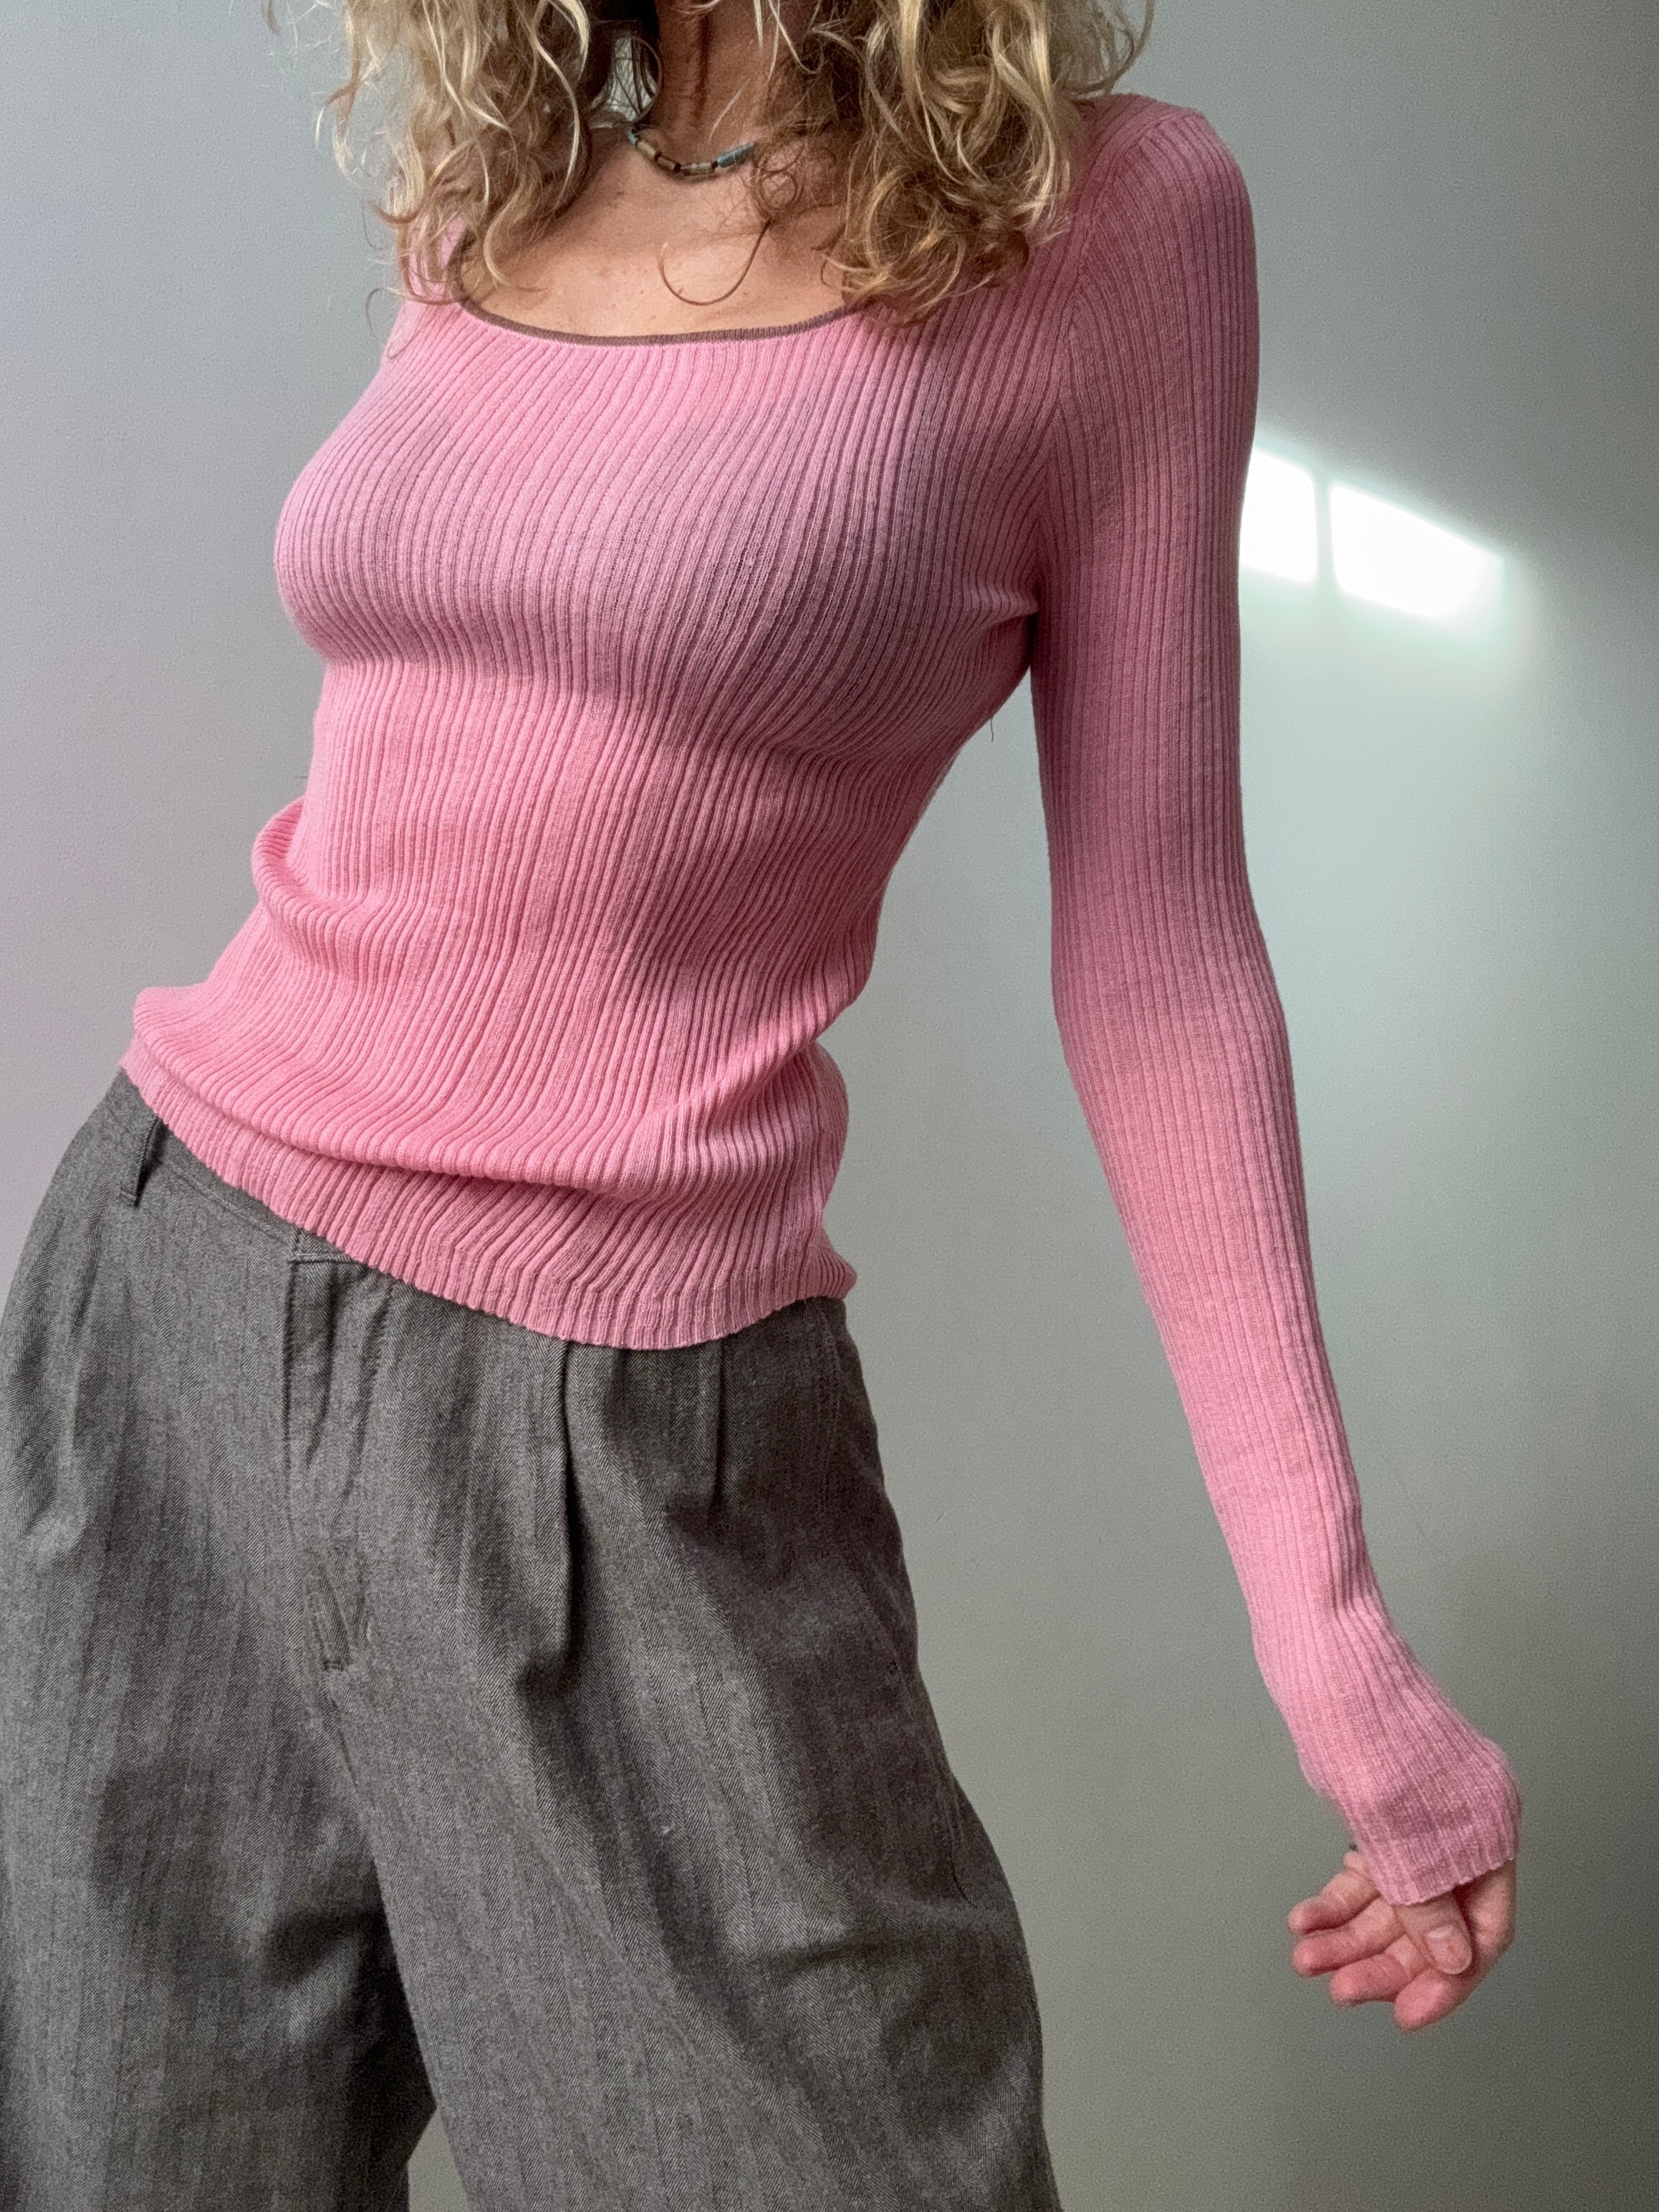 Future Nomads Tops One Size WGWE Light Pink Knit Top